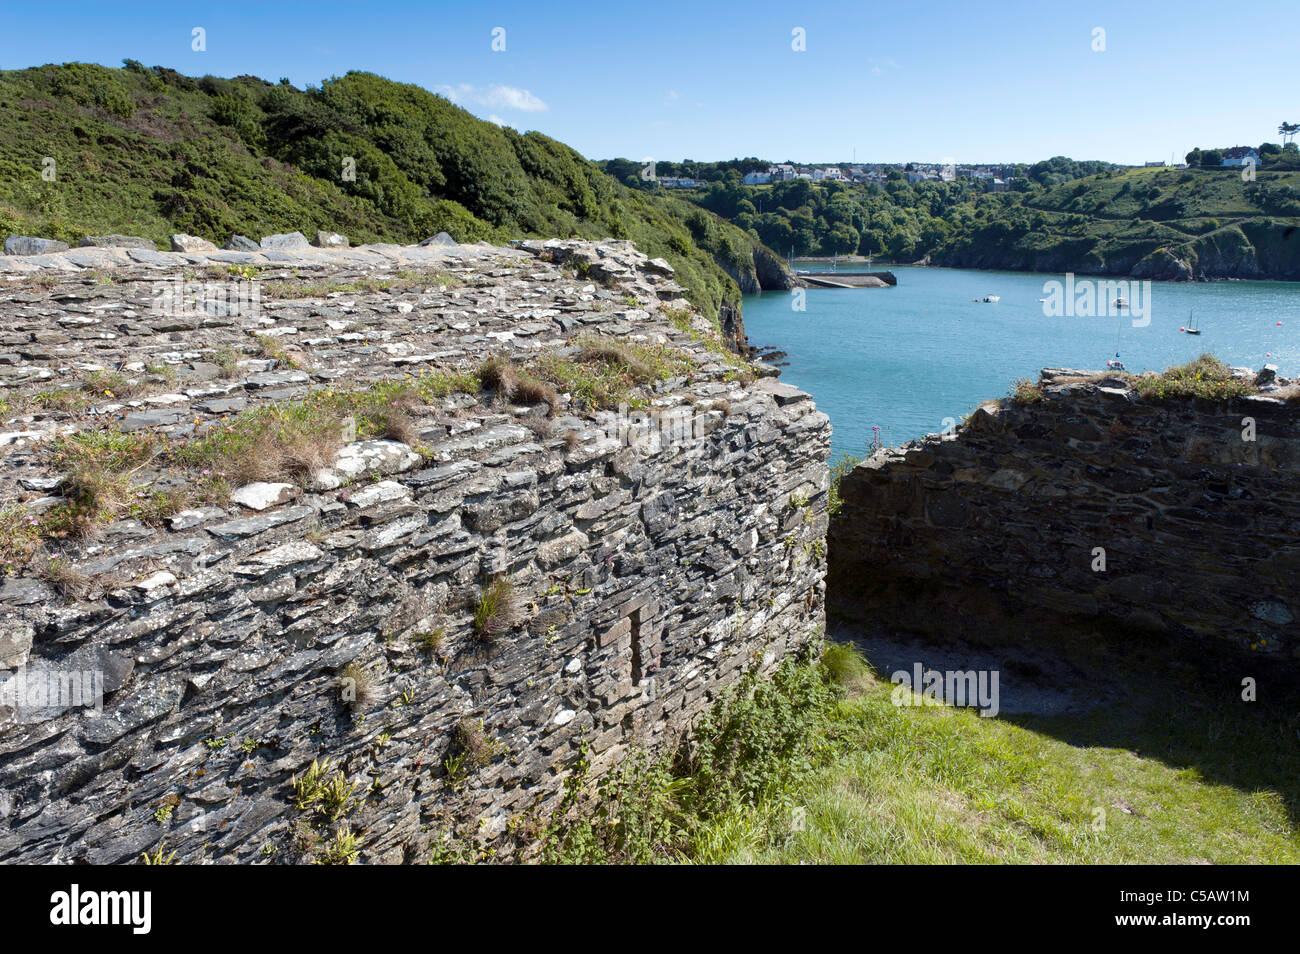 Disused stone building forming part of Fishguard Fort, defending the Lower Town Harbour, built in 1780. Stock Photo